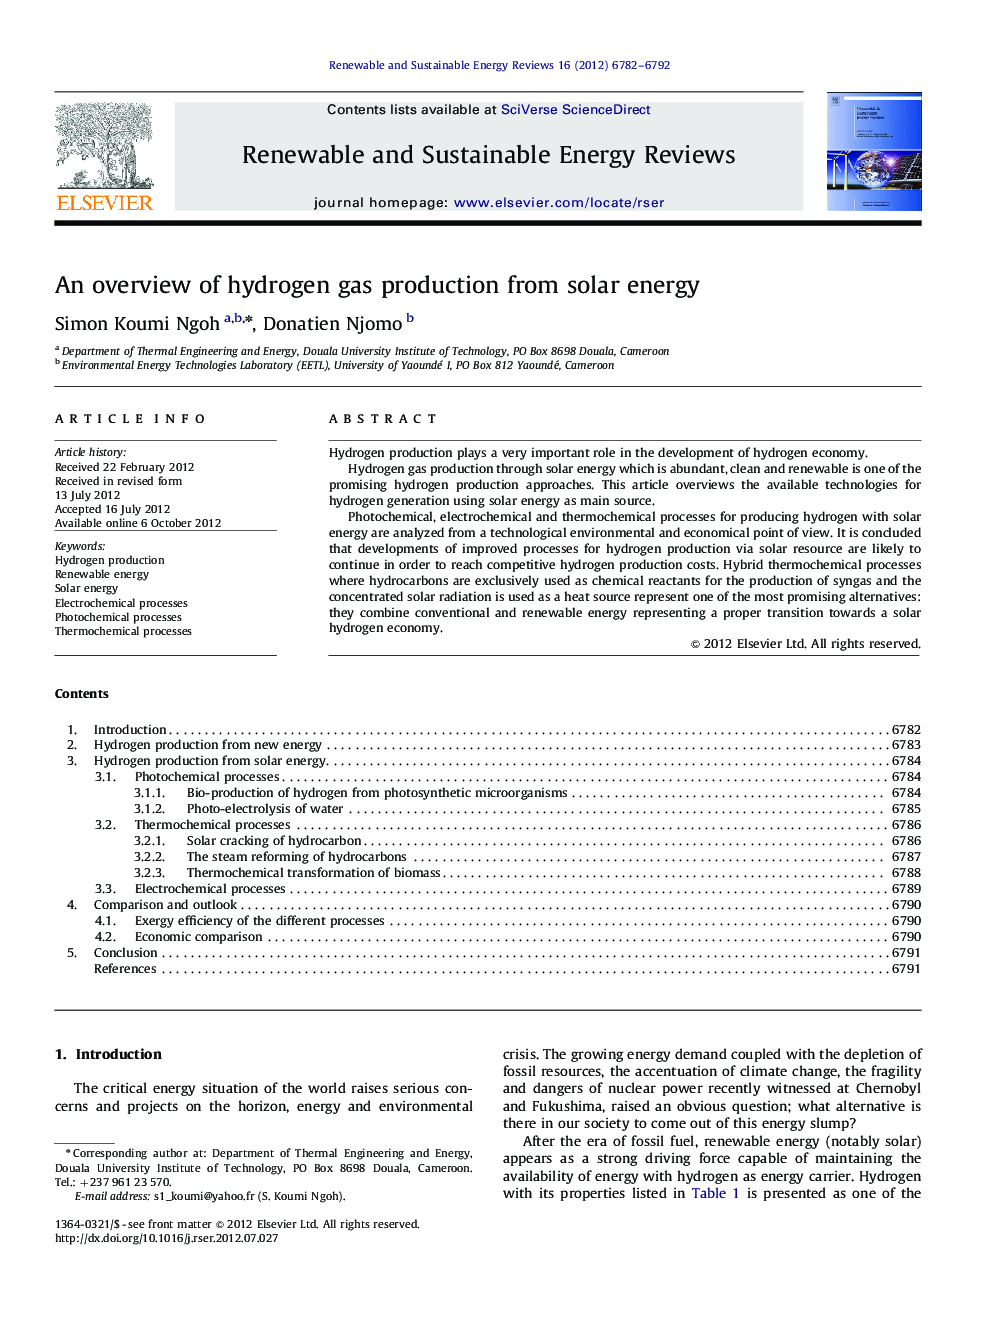 An overview of hydrogen gas production from solar energy